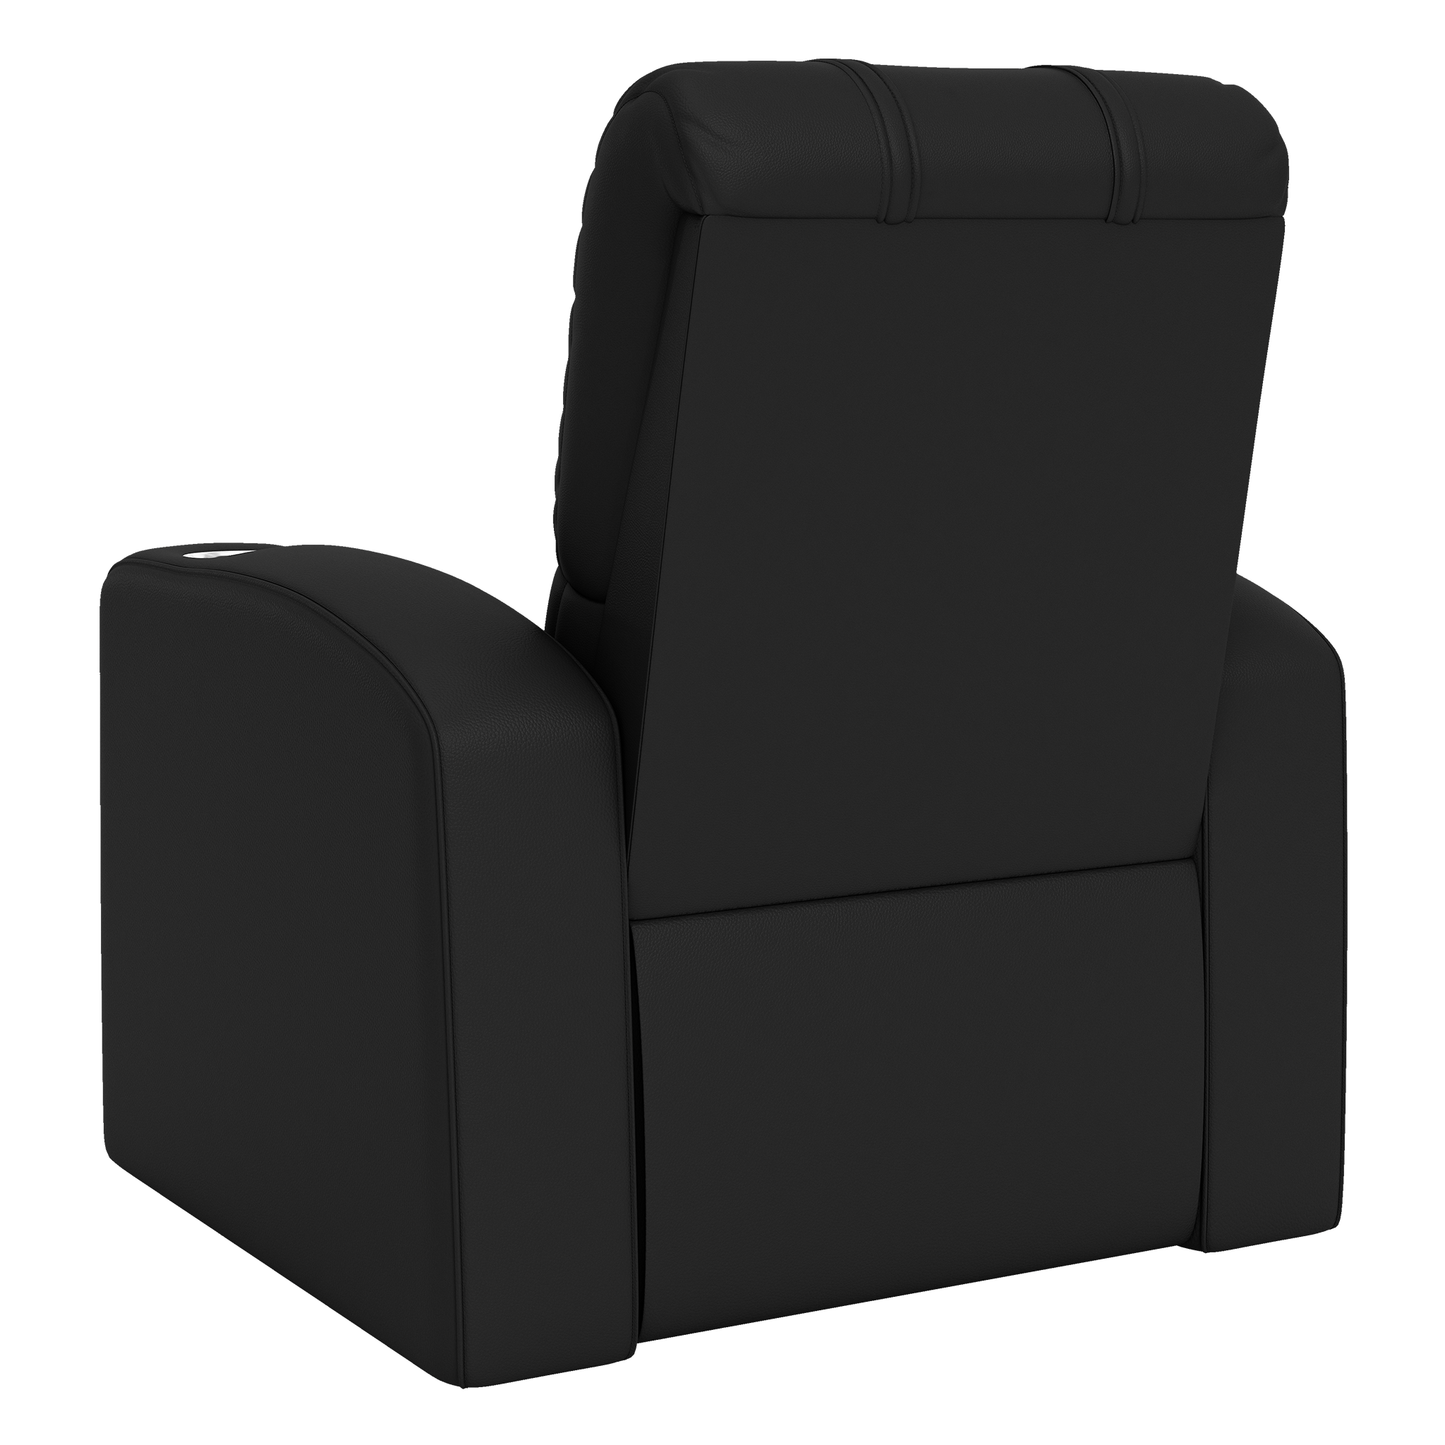 Relax Home Theater Recliner with Deer Leaping Logo